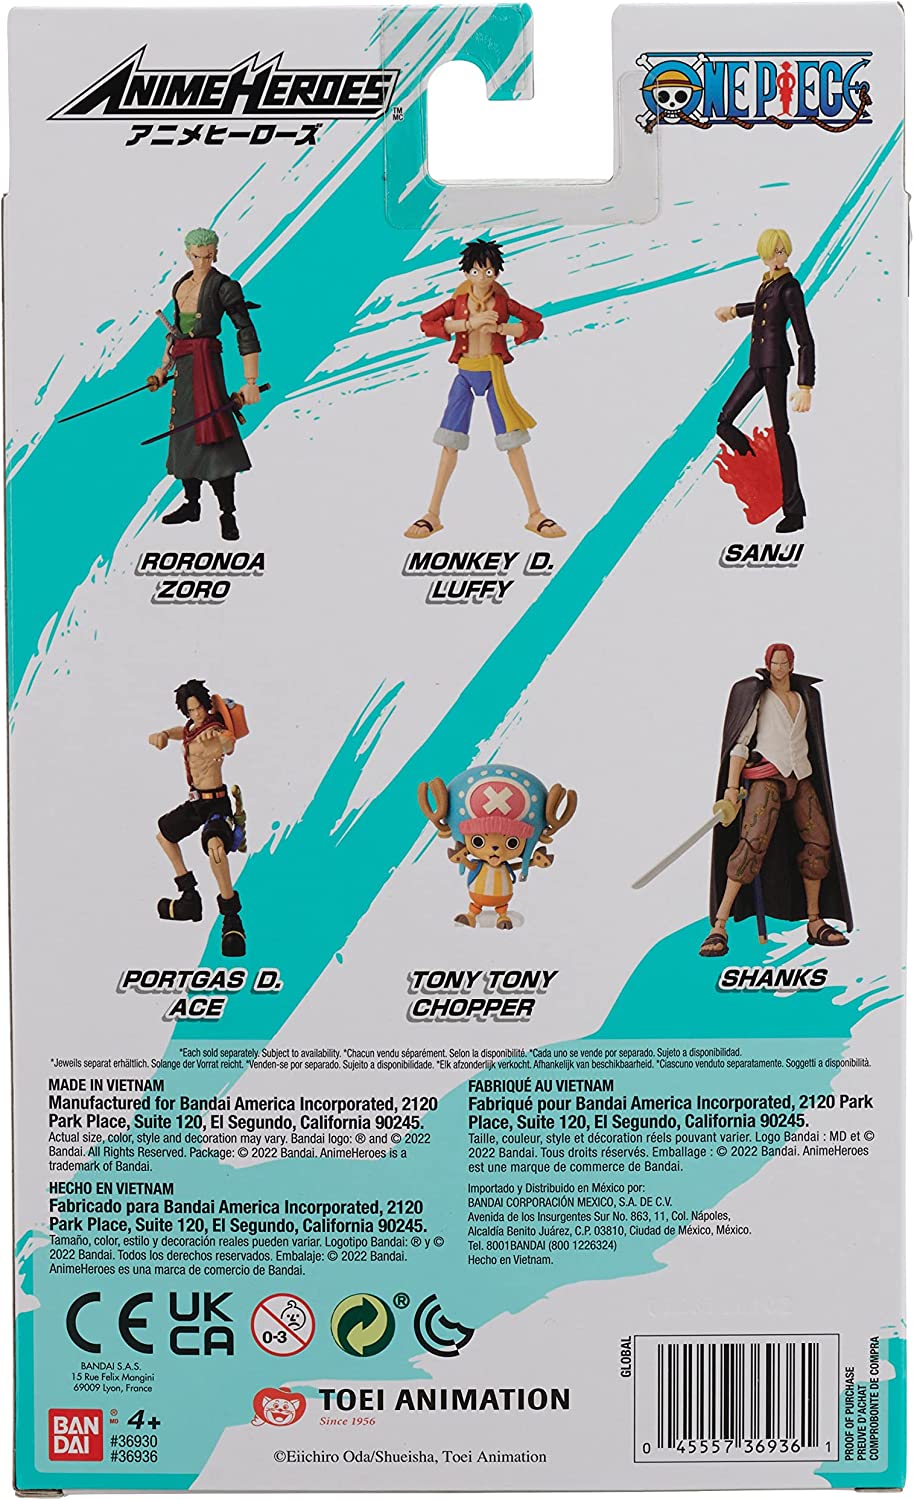 Anime Heroes One Piece  Monkey D Luffy Action Figure 36931  One Piece   Monkey D Luffy Action Figure 36931  Buy Action figure toys in India shop  for Anime Heroes products in India  Flipkartcom